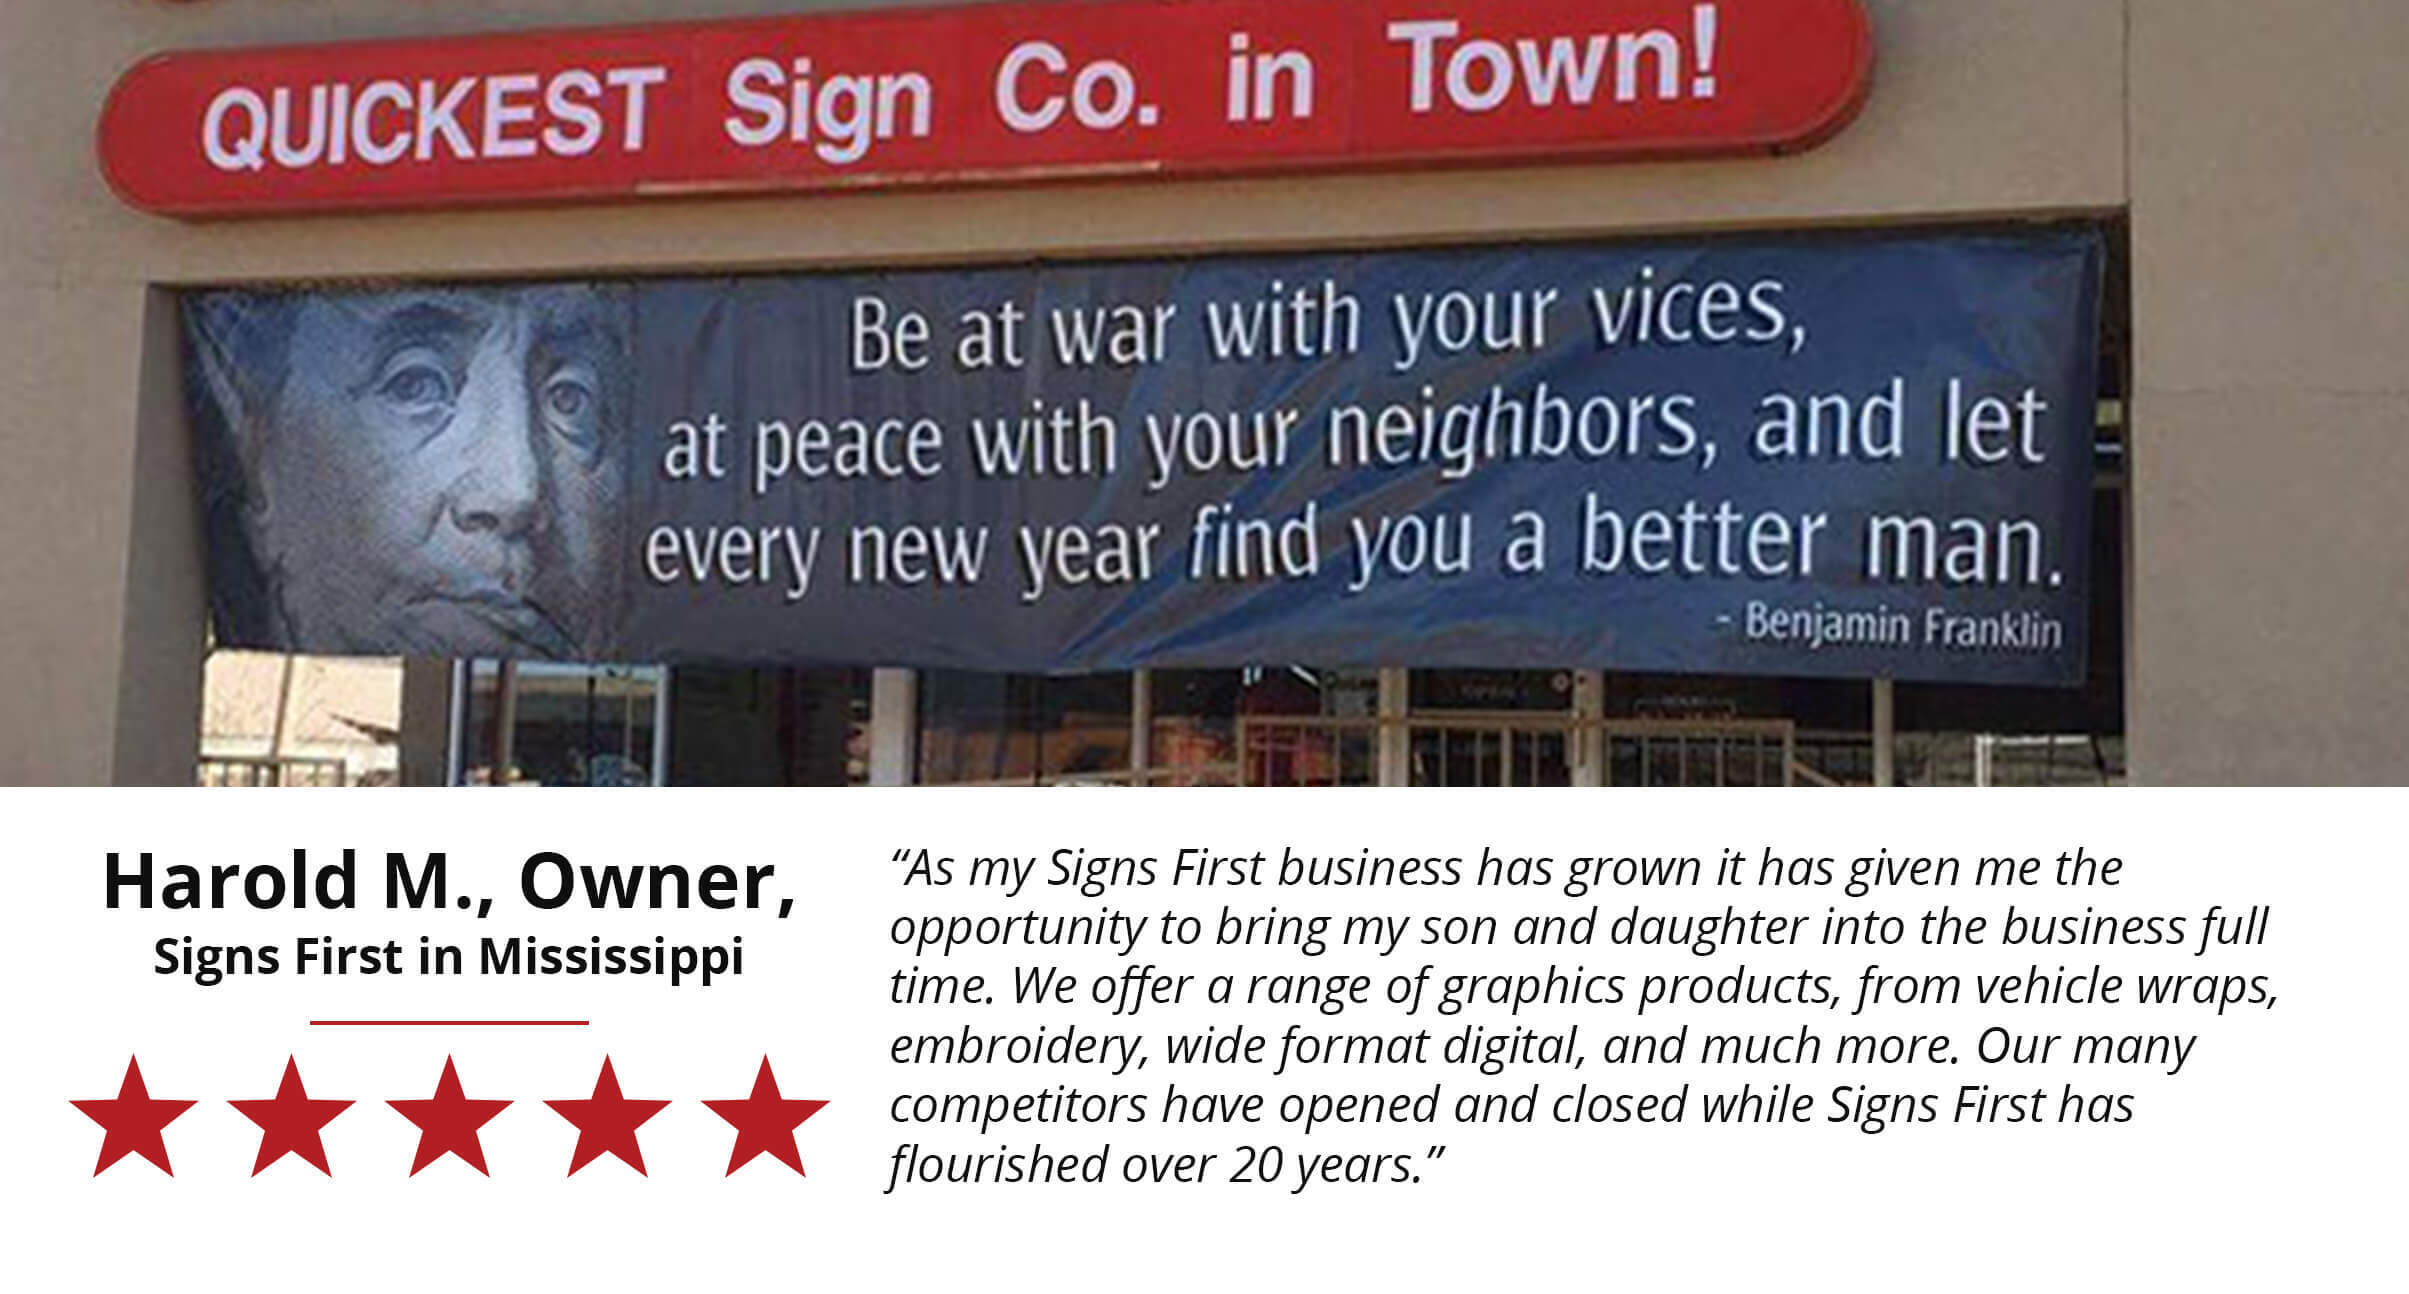 As my Signs First Business has grown it has given me the opportunity to bring my son and daughter into the business full time. We offer a range of graphic products, from vehicle wraps, embroidery, wide format digital, and much more. Our many competitors have opened and closed while Signs First has flourished over 20 years. Harold M. Owner of Signs First in Mississippi.